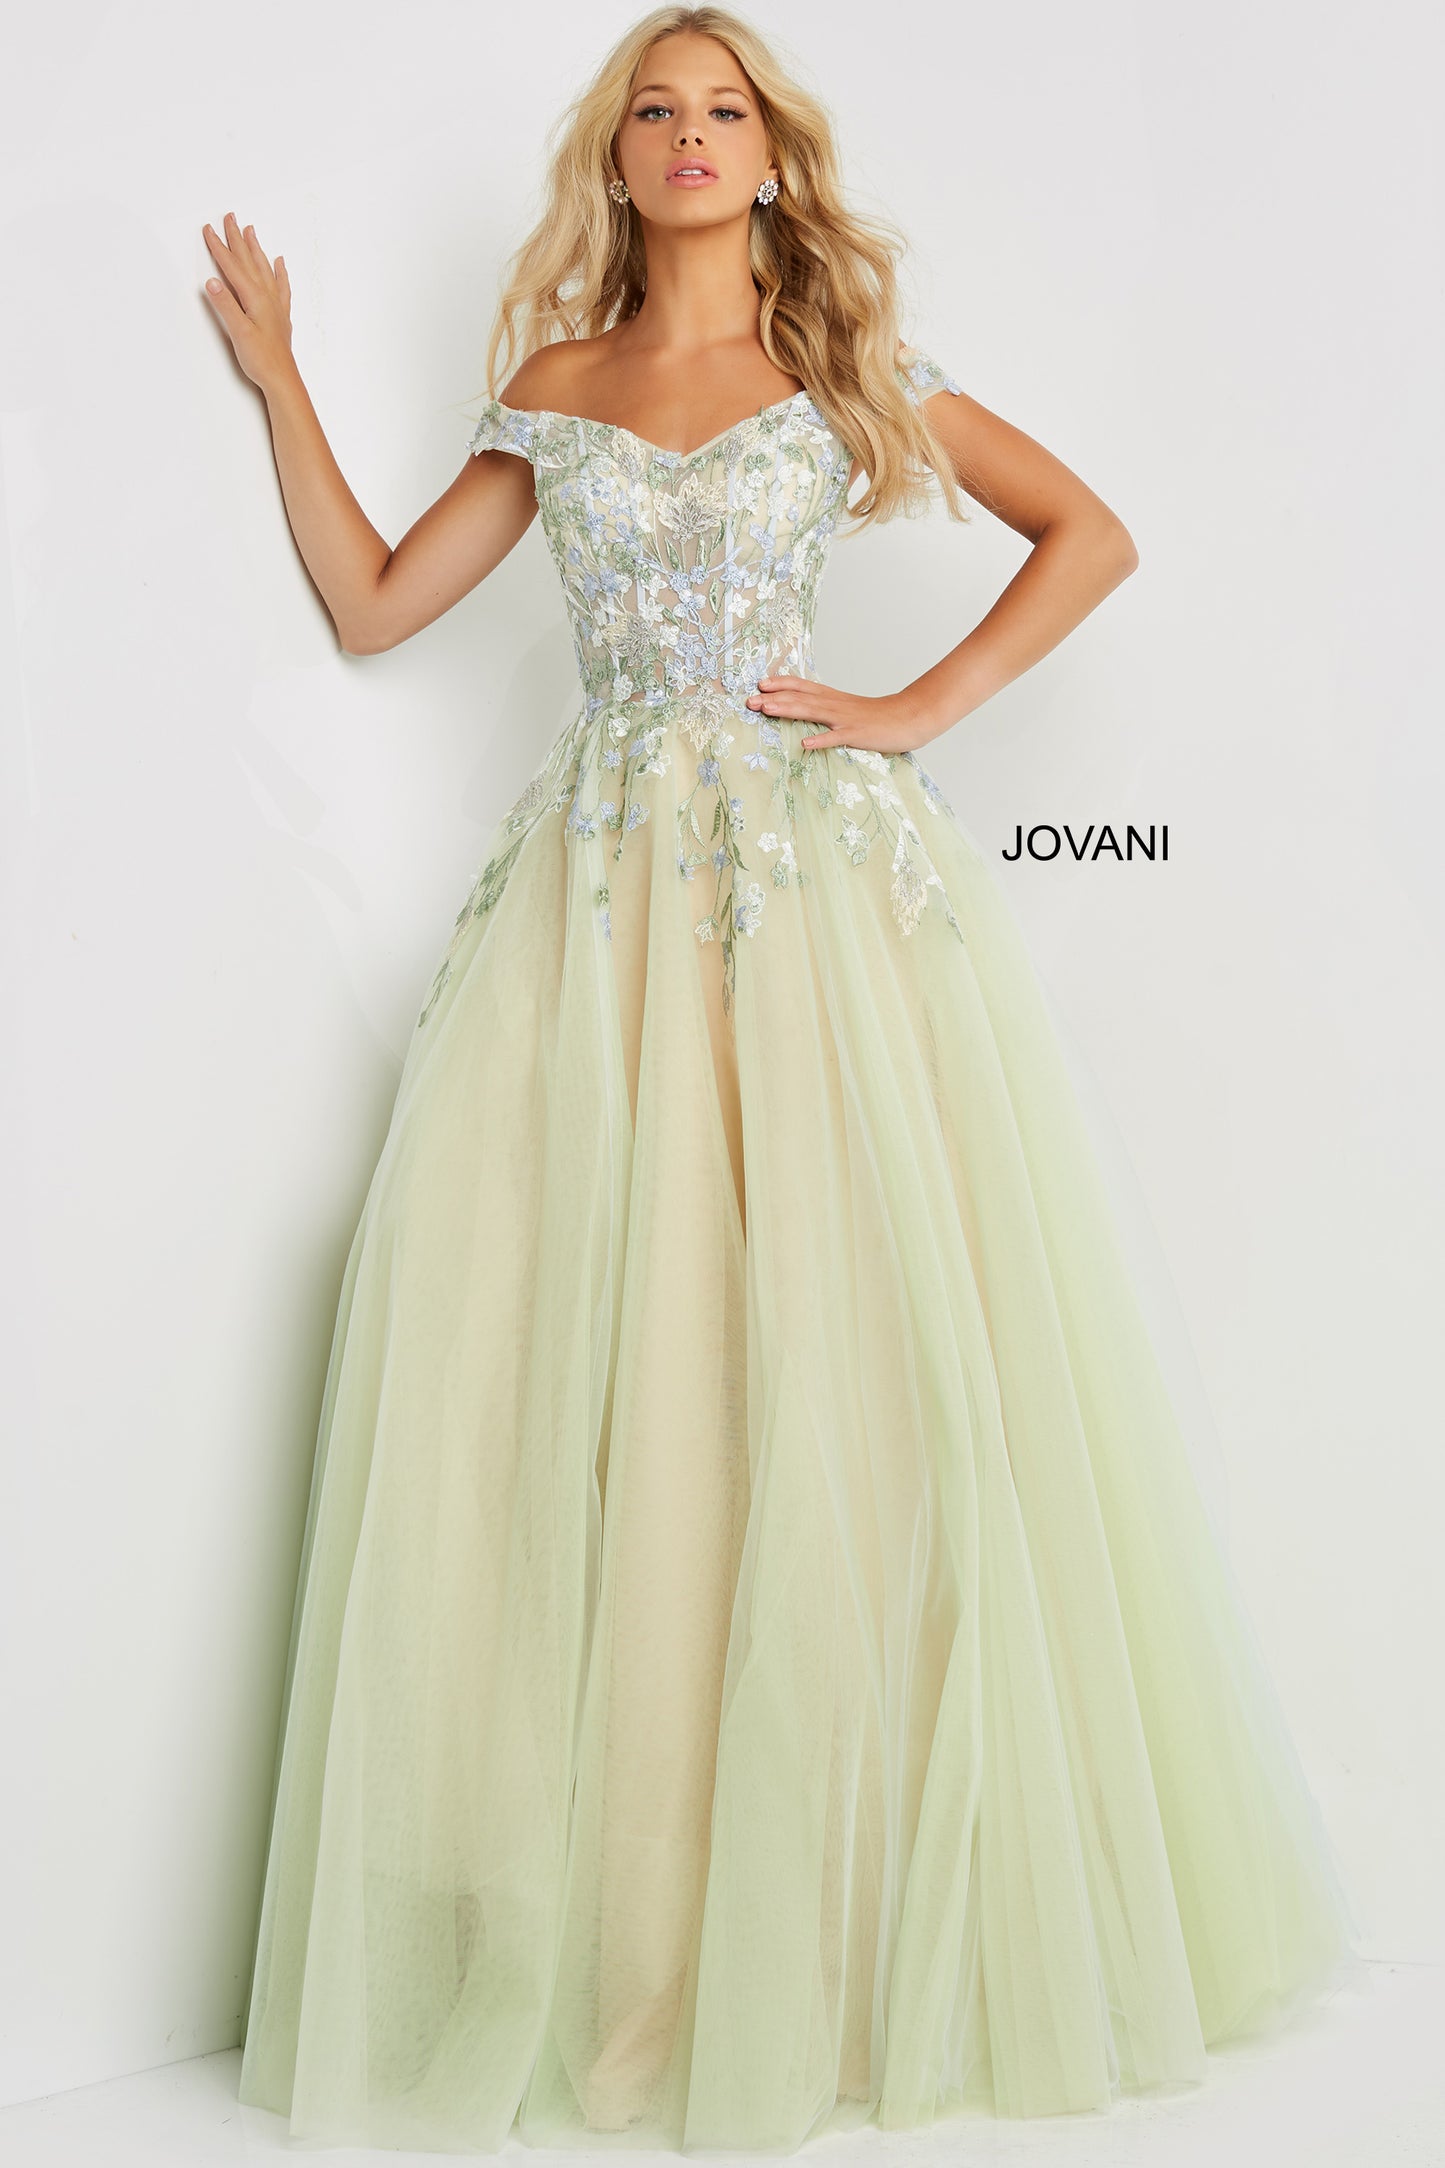 Jovani 06794 Long Ballgown Prom Pageant Gown